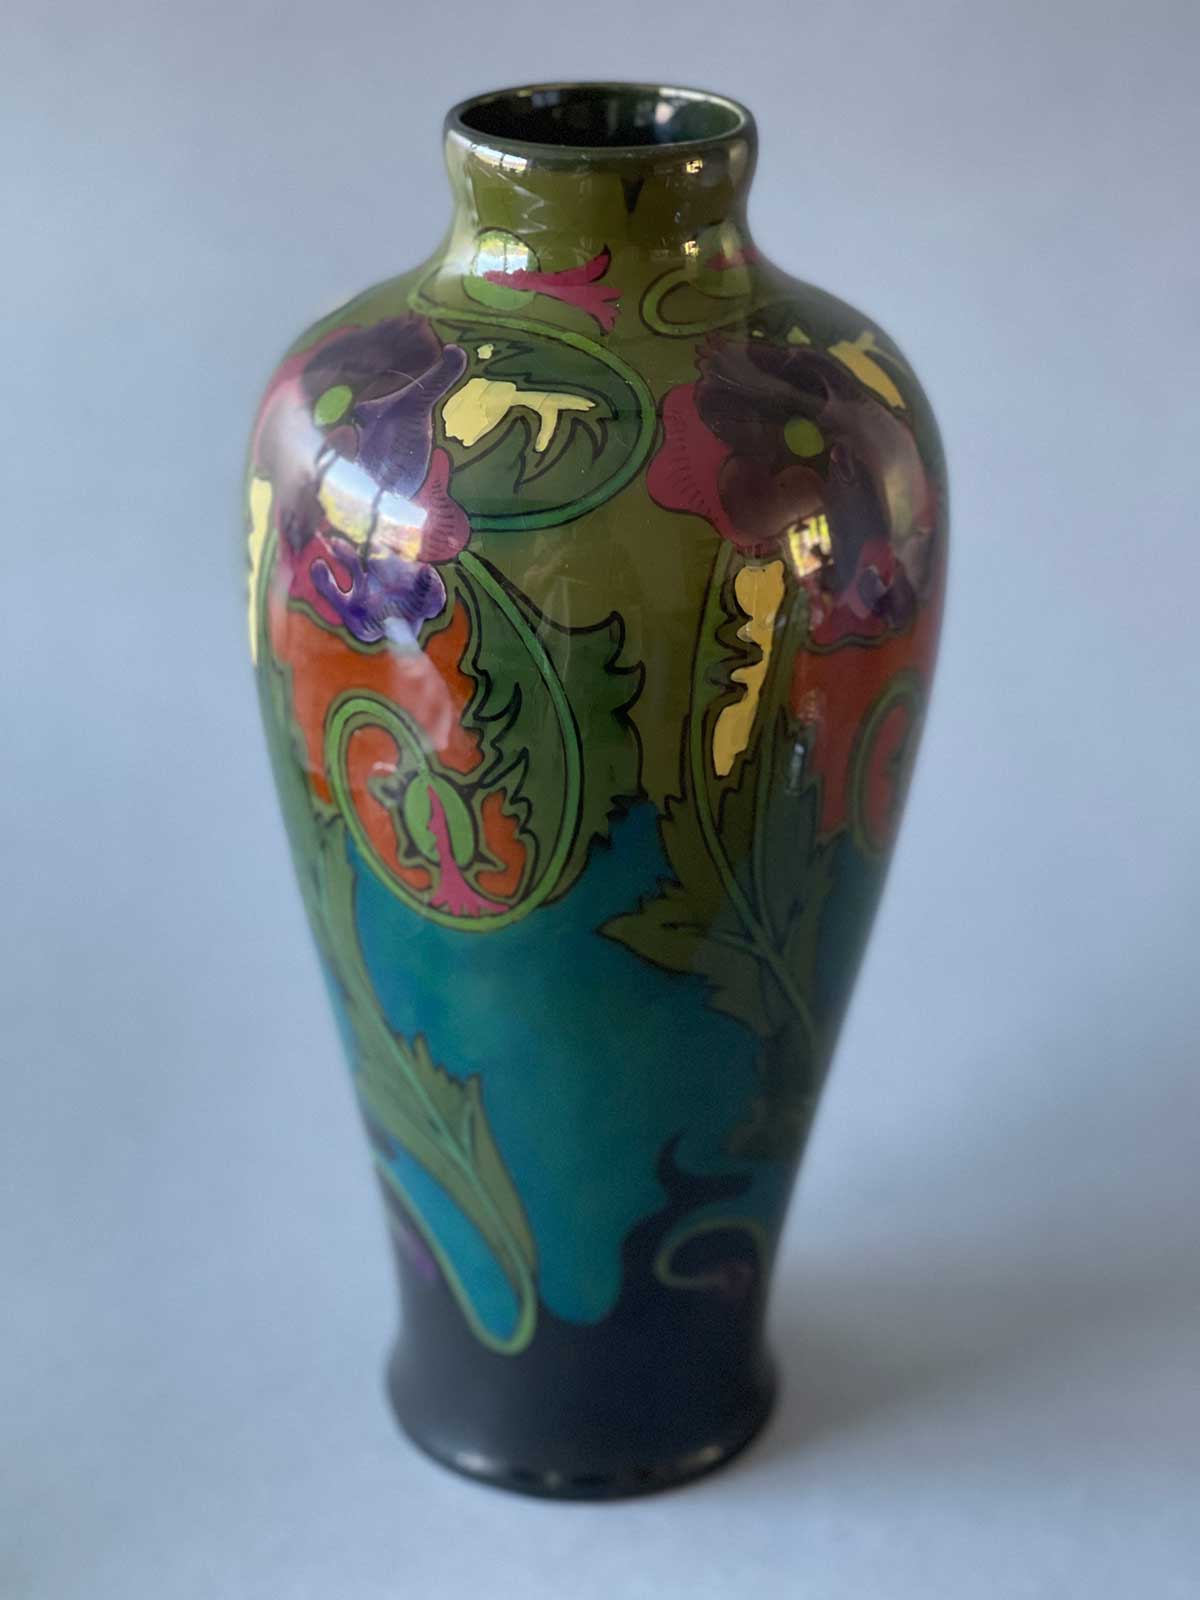 Getalenteerd via oor Gouda Pottery Vase 31 cm or 12 inch Decorated with Violets from 1907 -  Dutch Art Nouveau Pottery